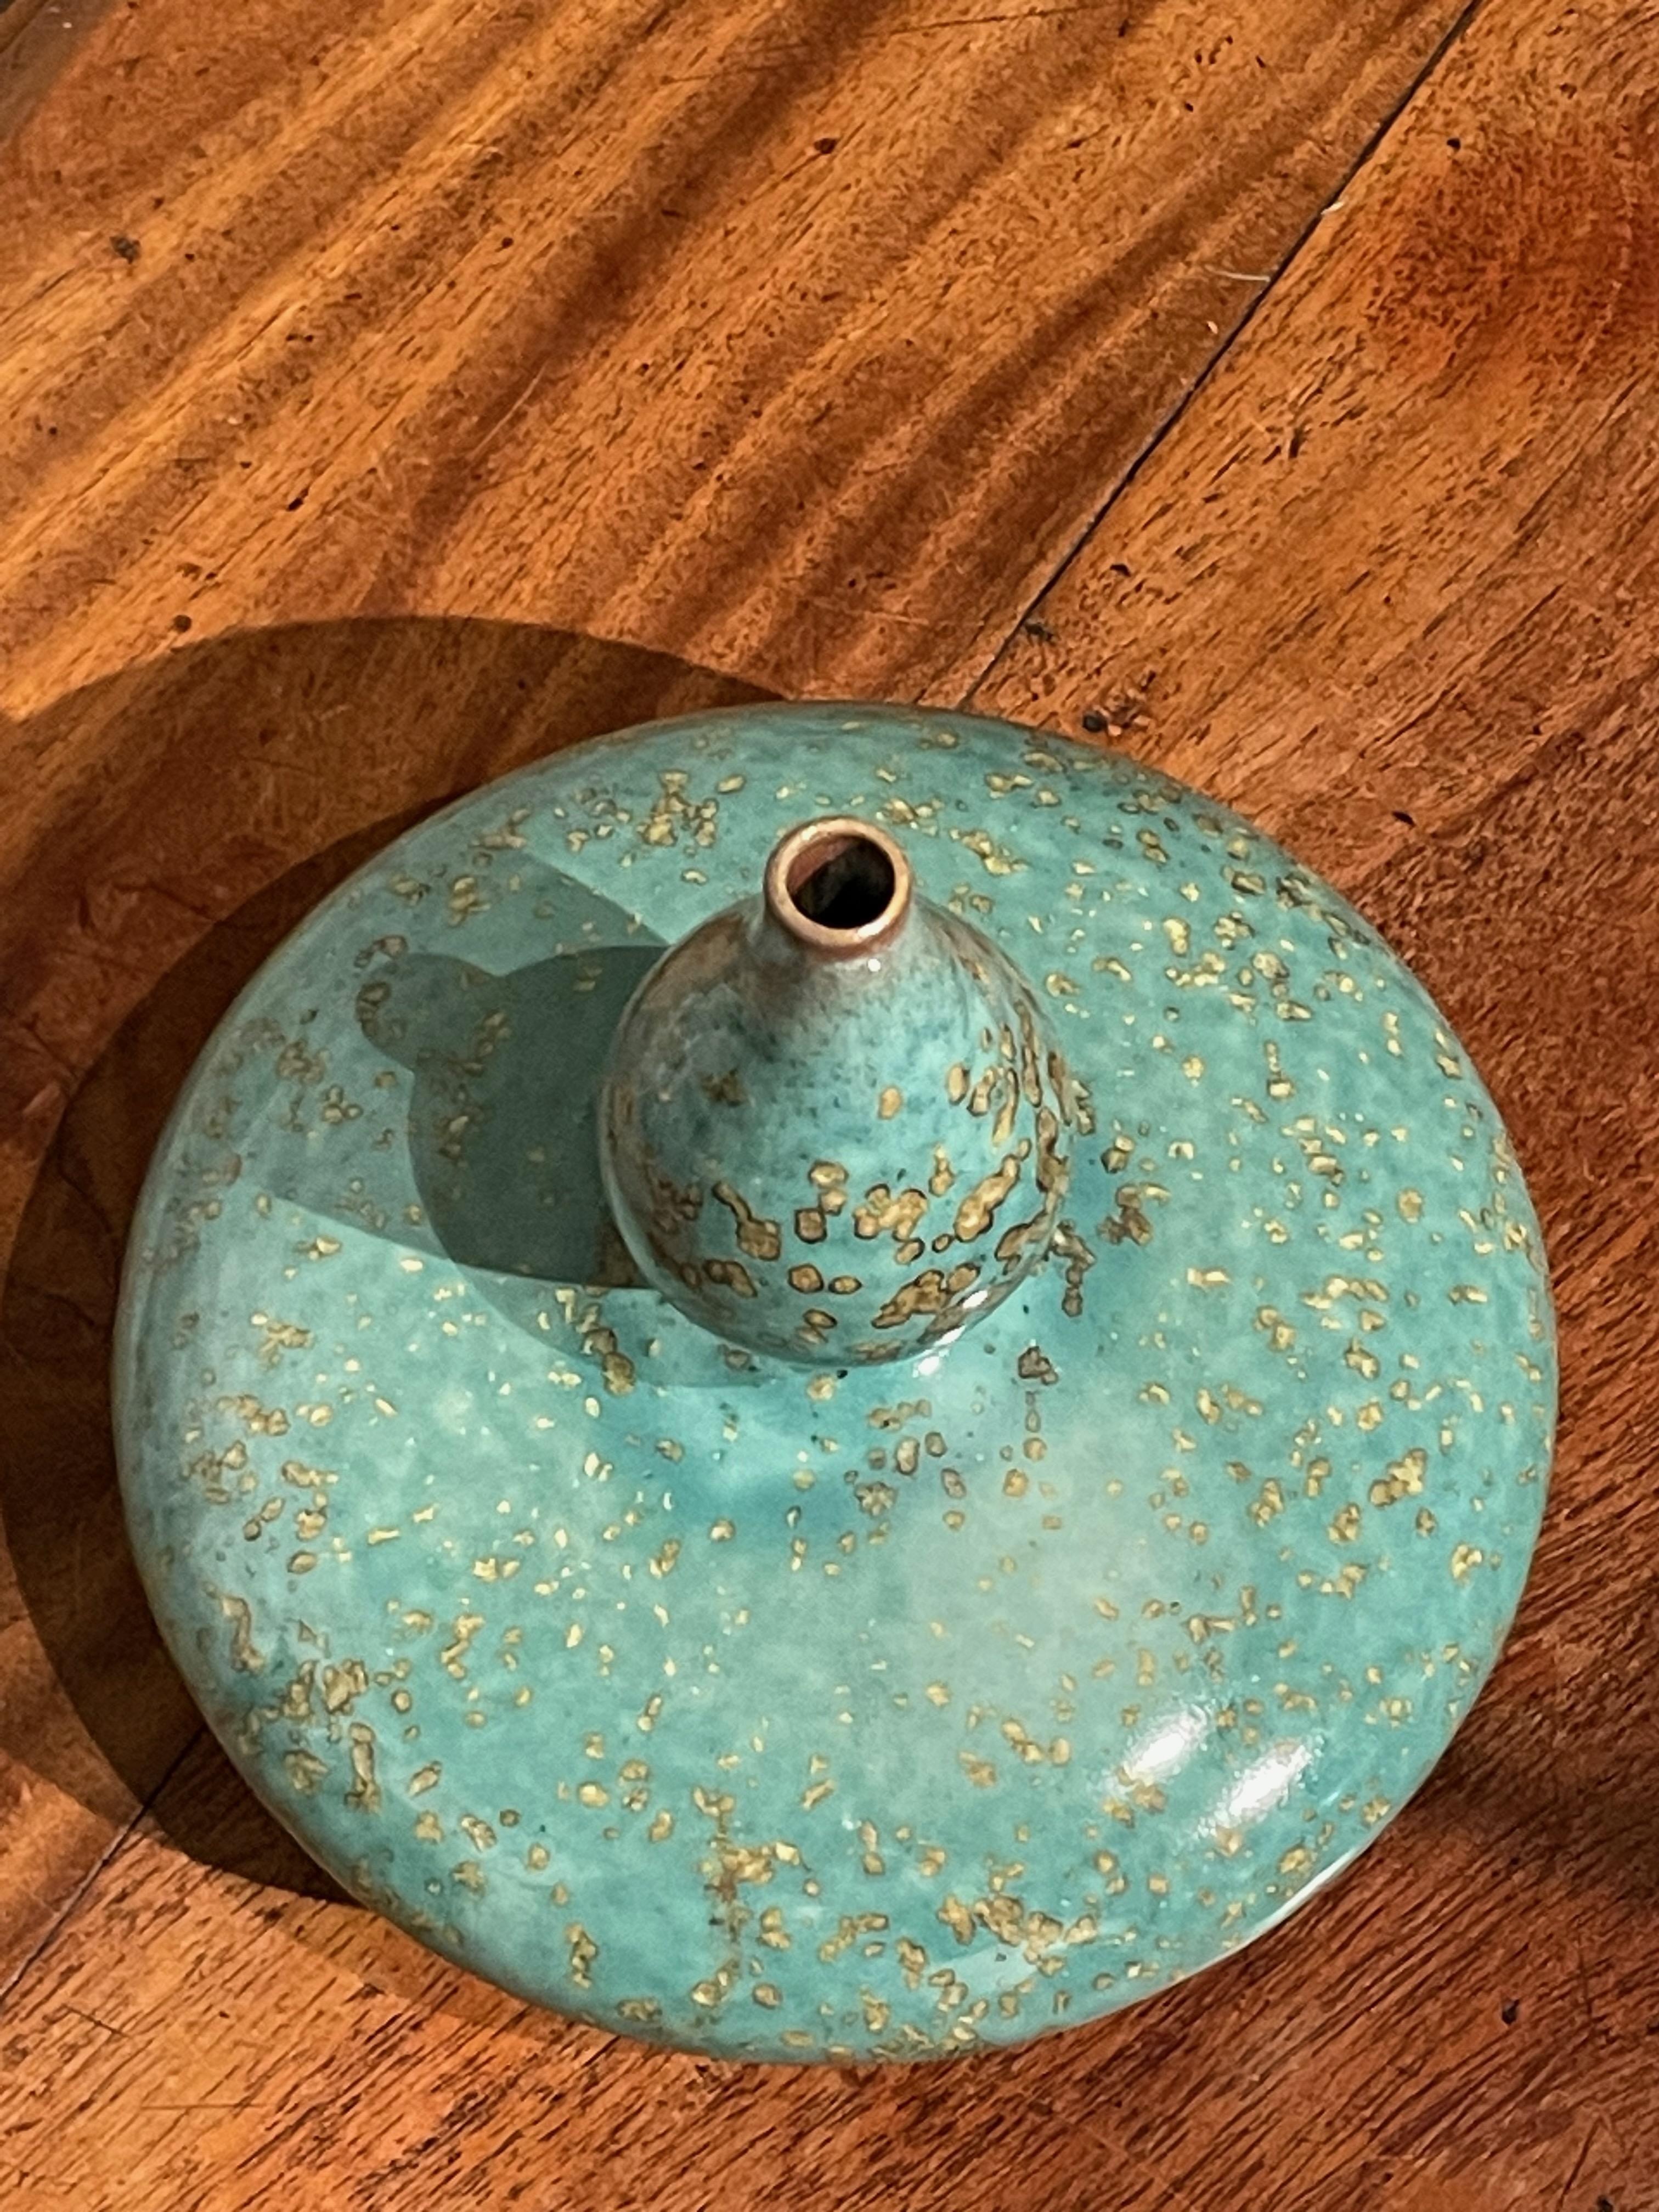 Turquoise with Gold Speckled Glaze Squat Shape Vase, China, Contemporary 2